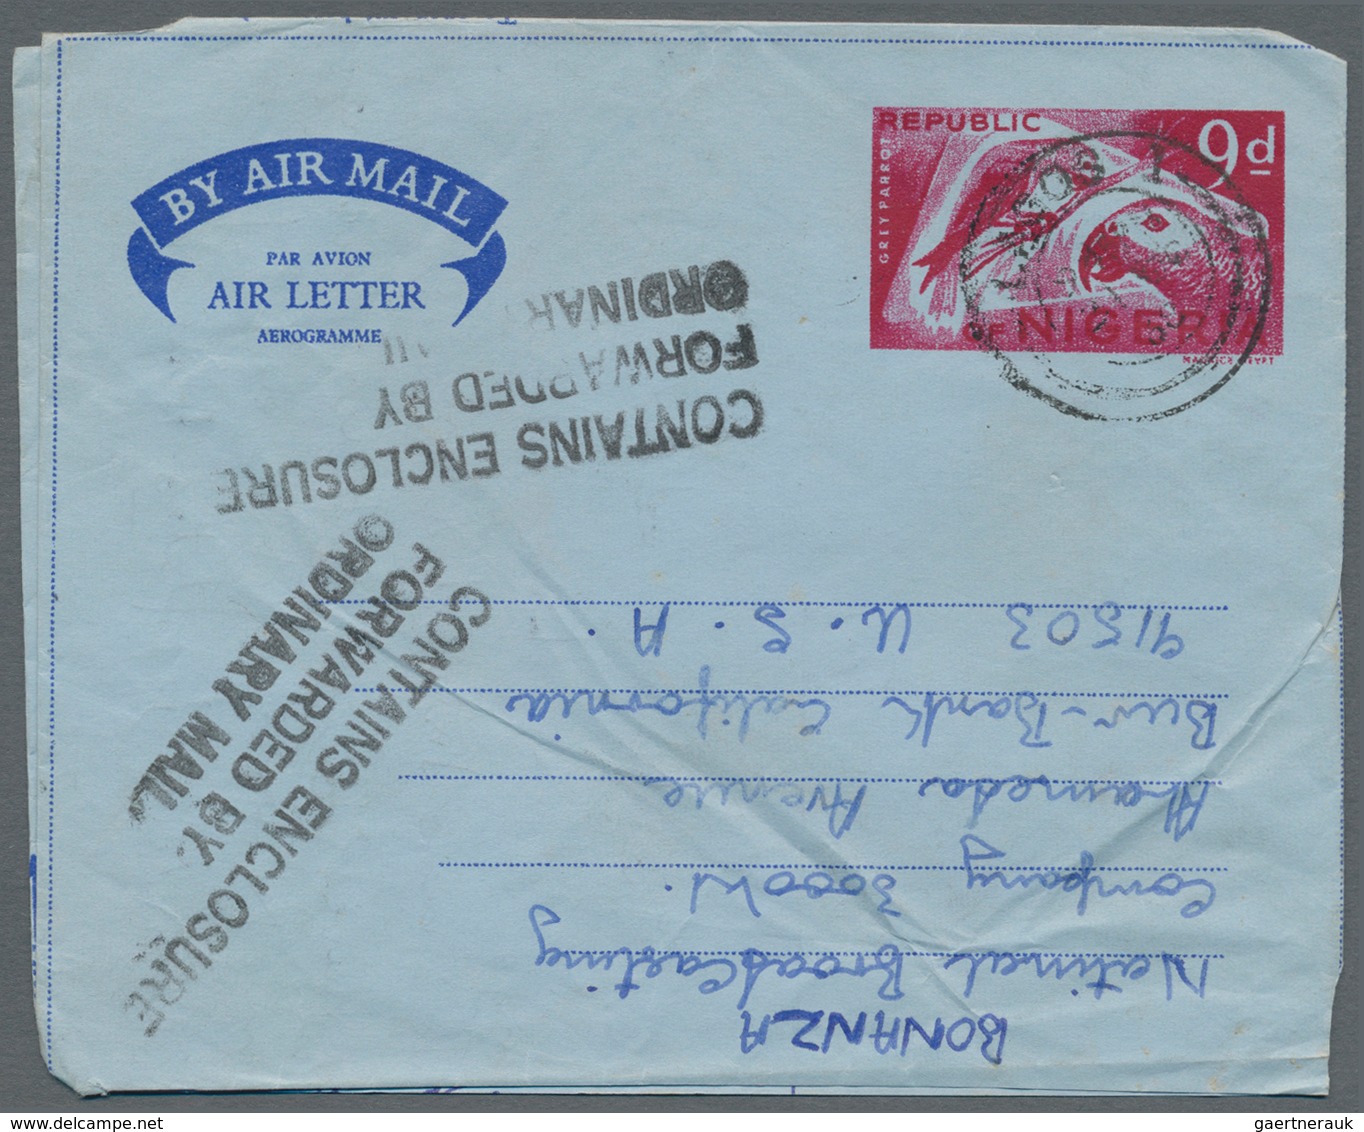 Nigeria: 1956/1973 (ca.), AEROGRAMMES: Accumulation With Approx. 750 Unused And Used/CTO Airletters - Nigeria (...-1960)